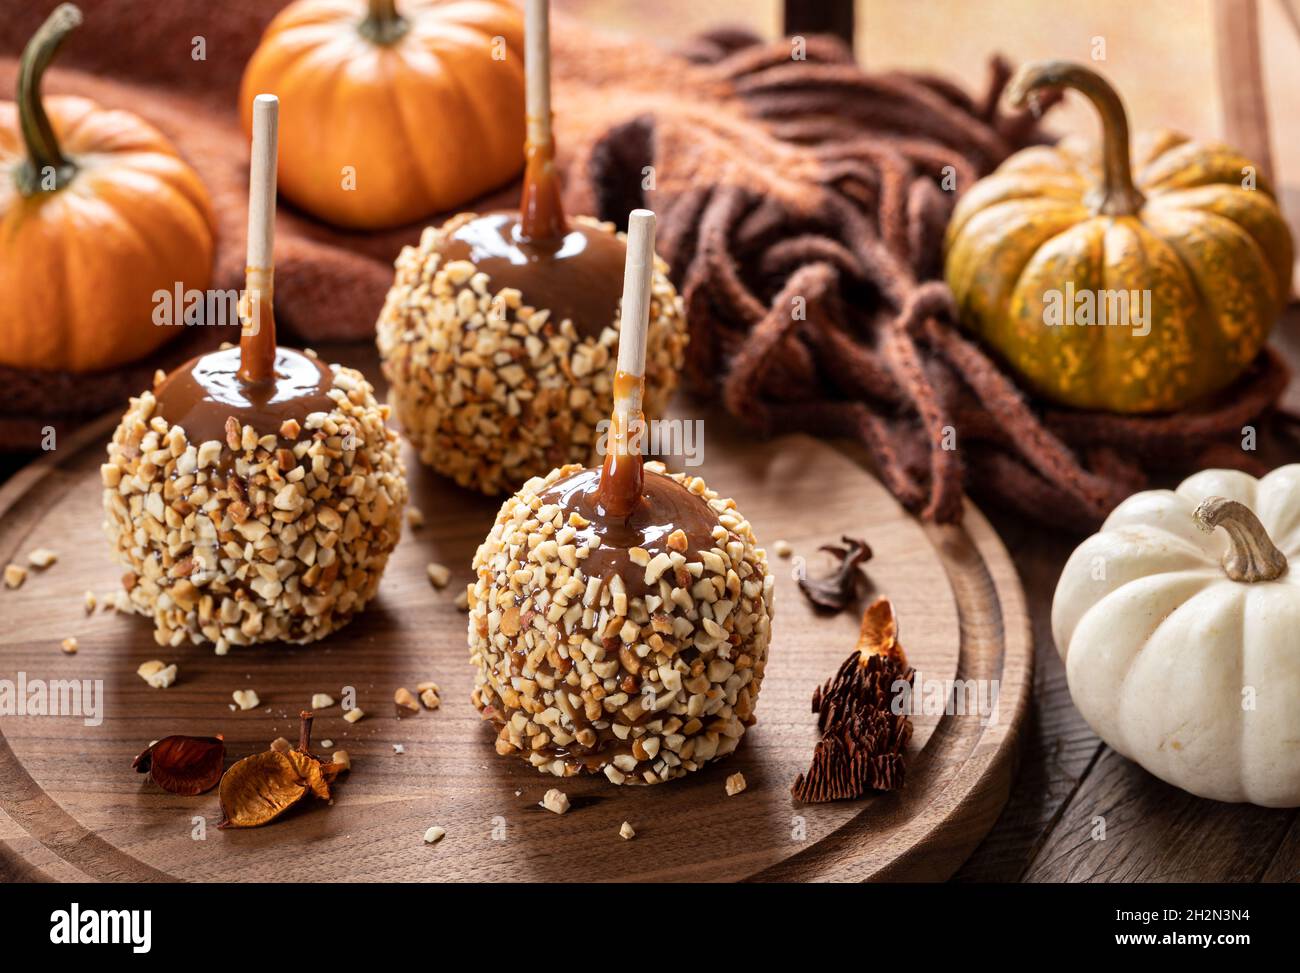 Caramel apples coated with nuts on a wooden platter with mini pumpkins in background Stock Photo